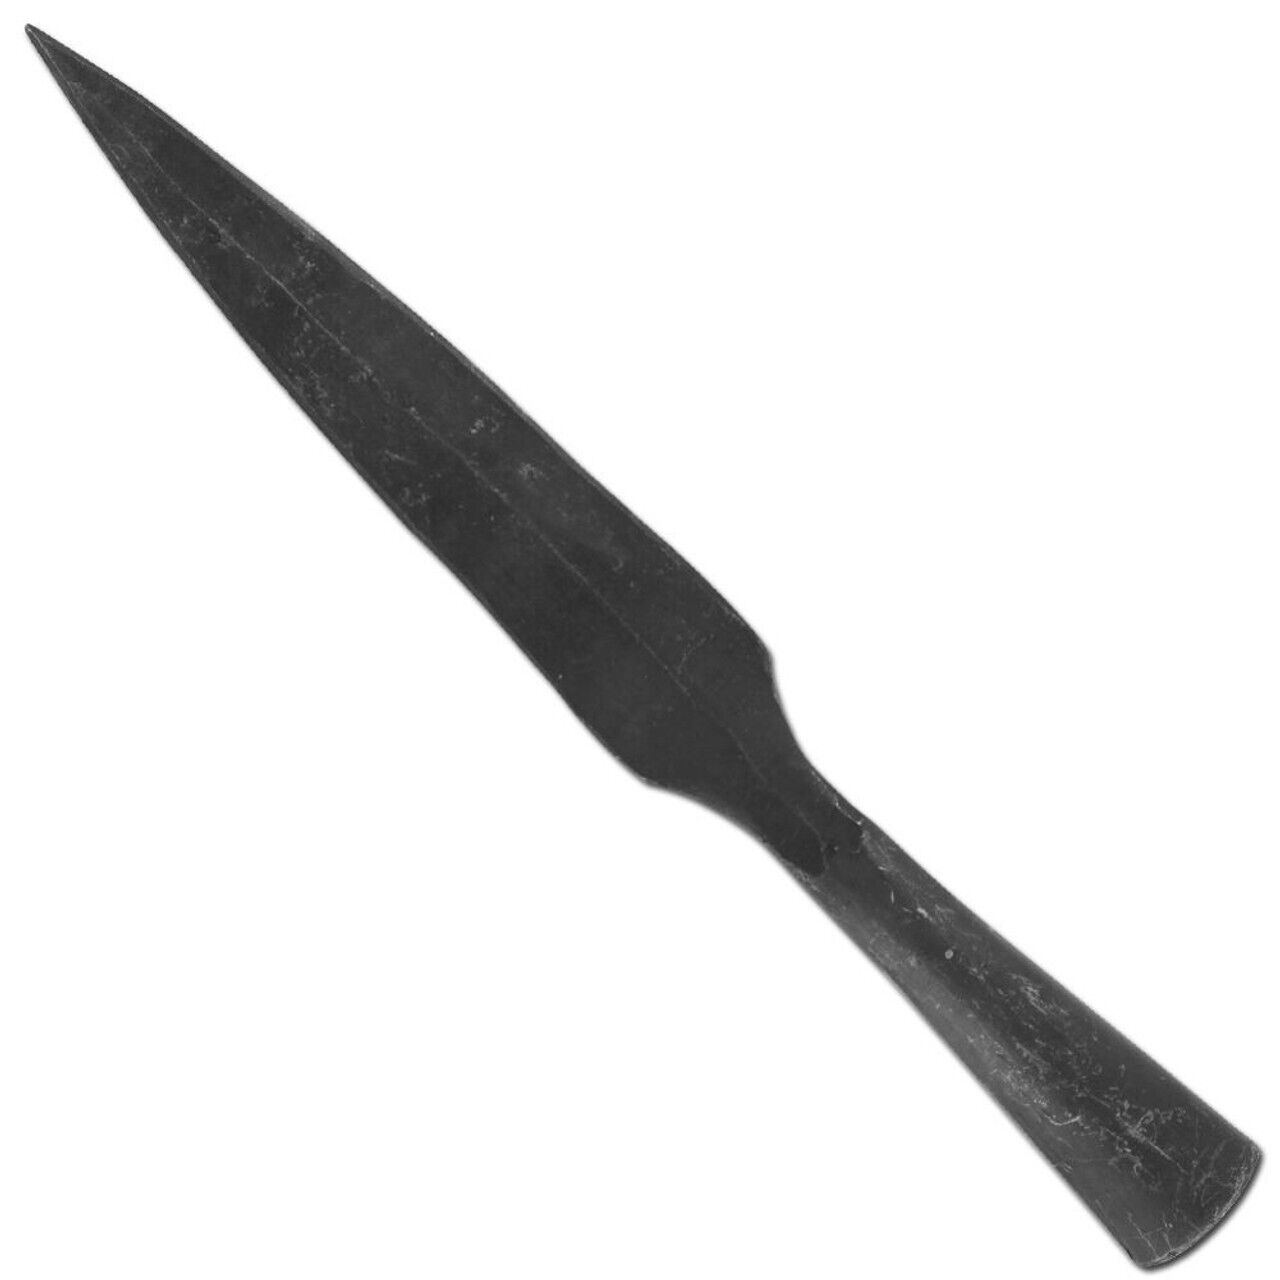 11.25 FUNCTIONAL MEDIEVAL FORGED BLACKENED IRON SHARPENED REENACTMENT SPEAR HEAD